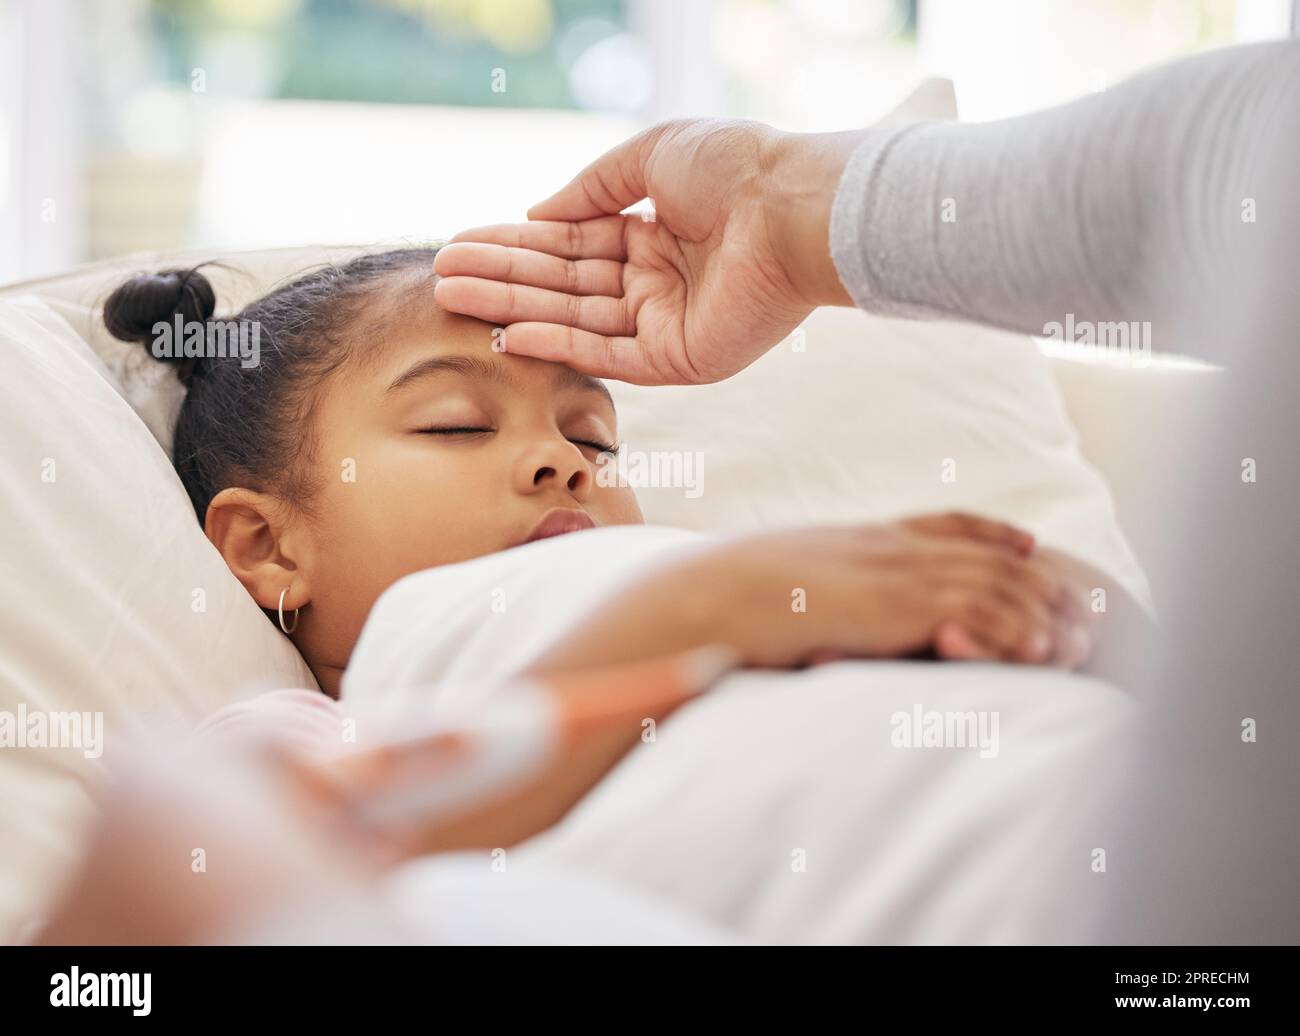 Sick little girl in bed while concerned mother uses a thermometer to check her temperature. Mixed race parent feeling daughters forehead. Hispanic chi Stock Photo